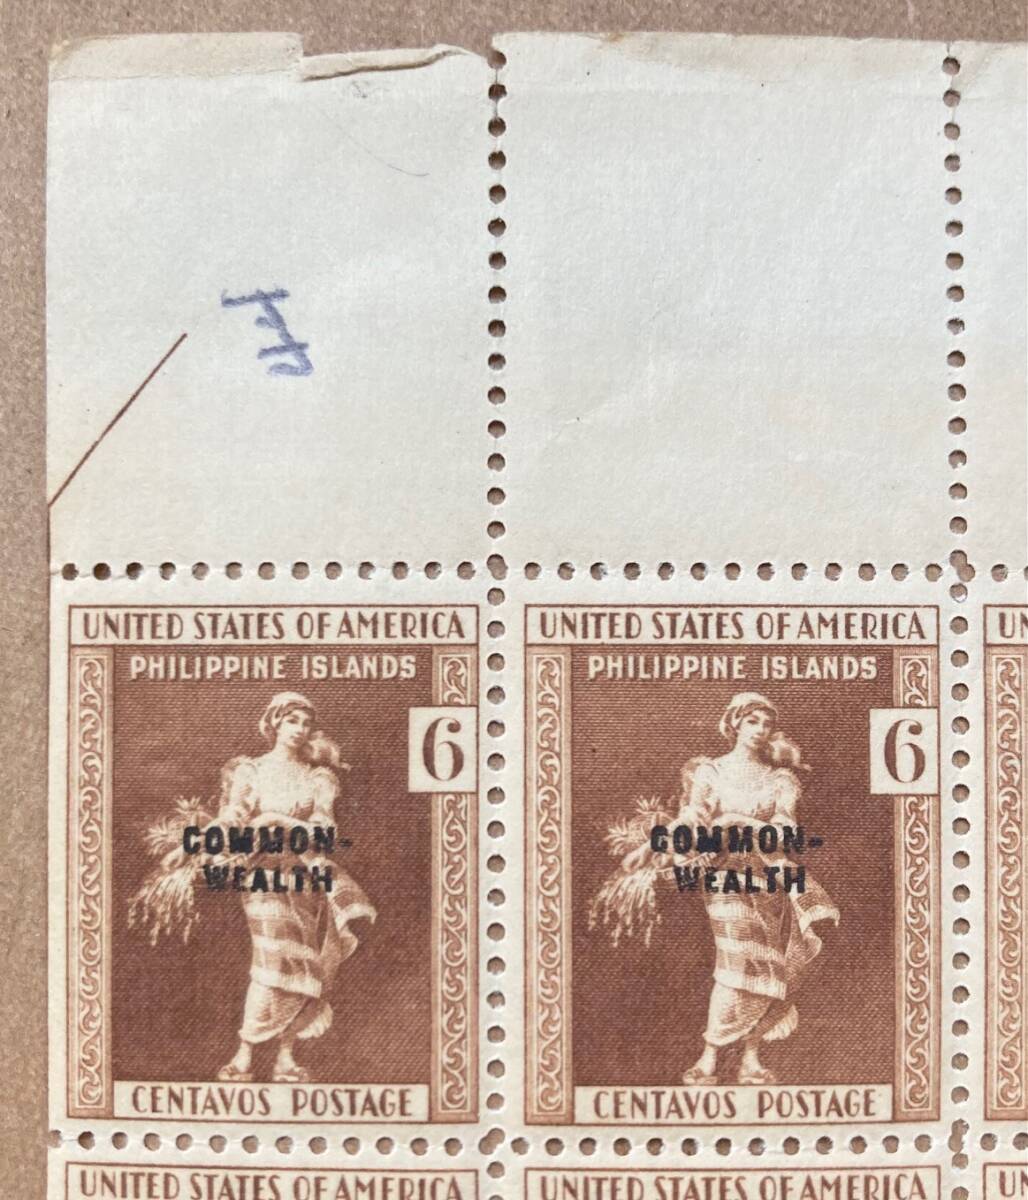 [ America . Philippines ]1939 year issue COMMONWEALTH small character ..6c stamp 64 surface (8x8) seat * small defect goods 